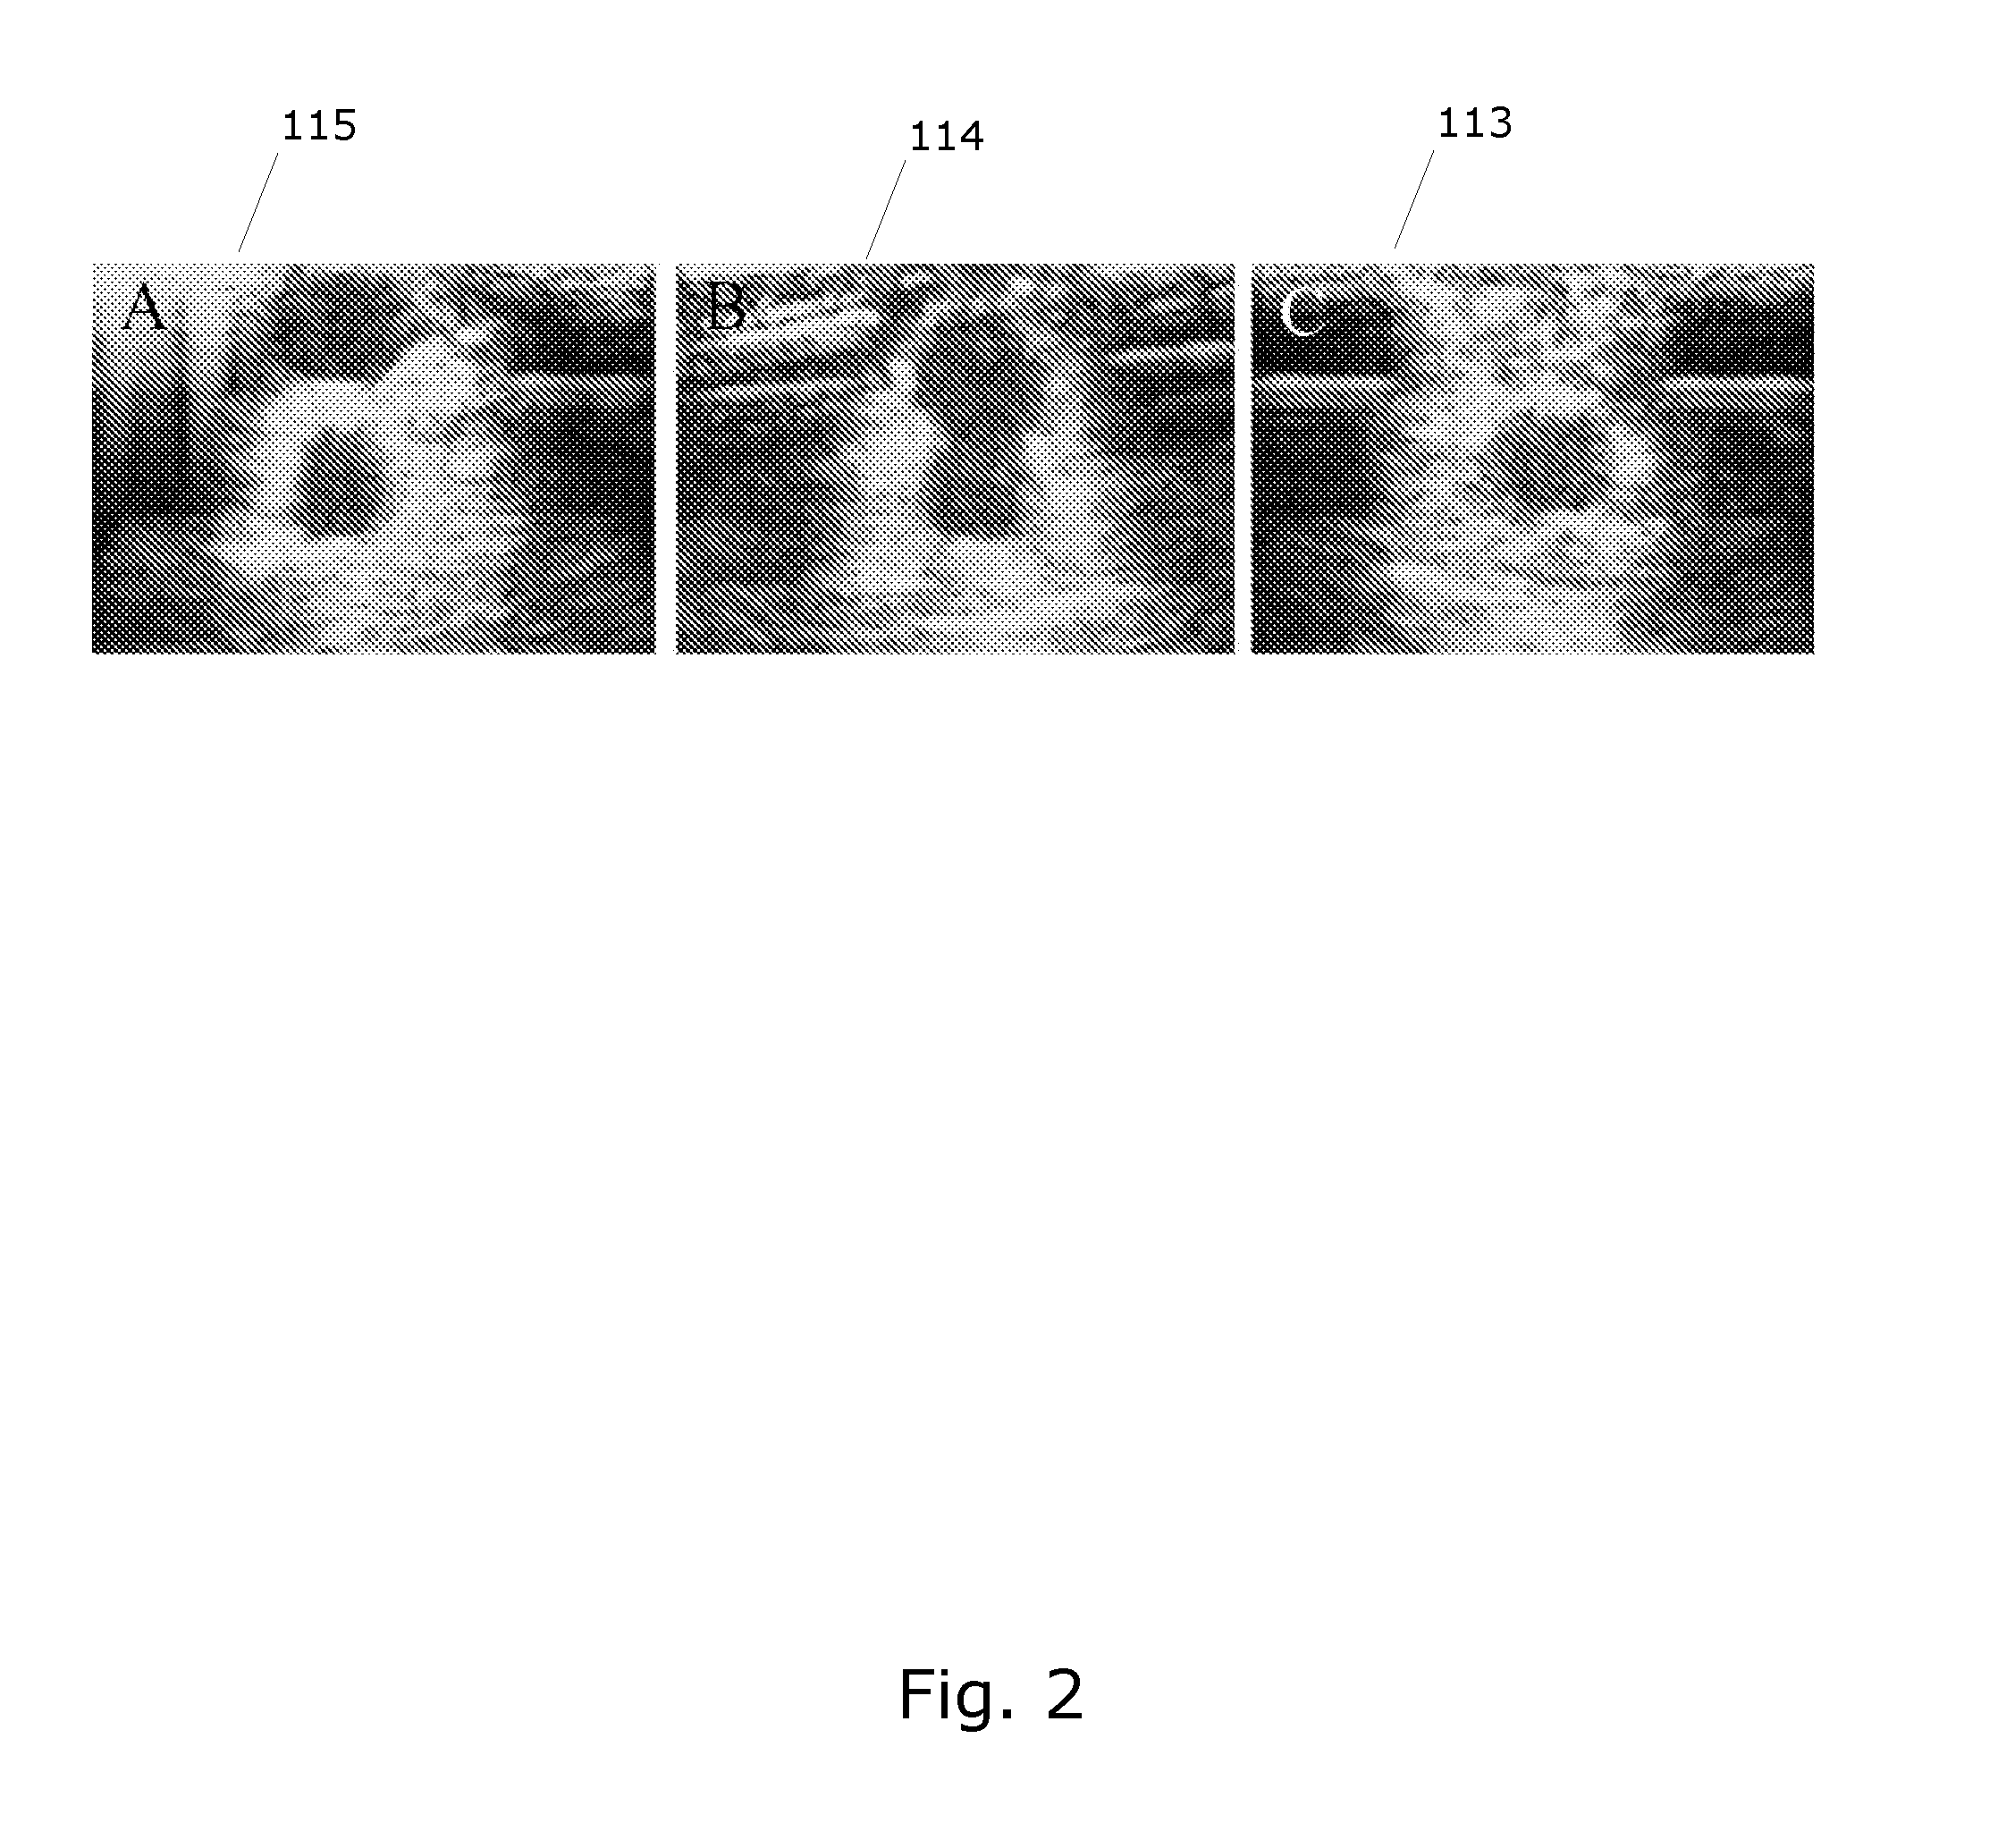 System for determining flow properties of a blood vessel